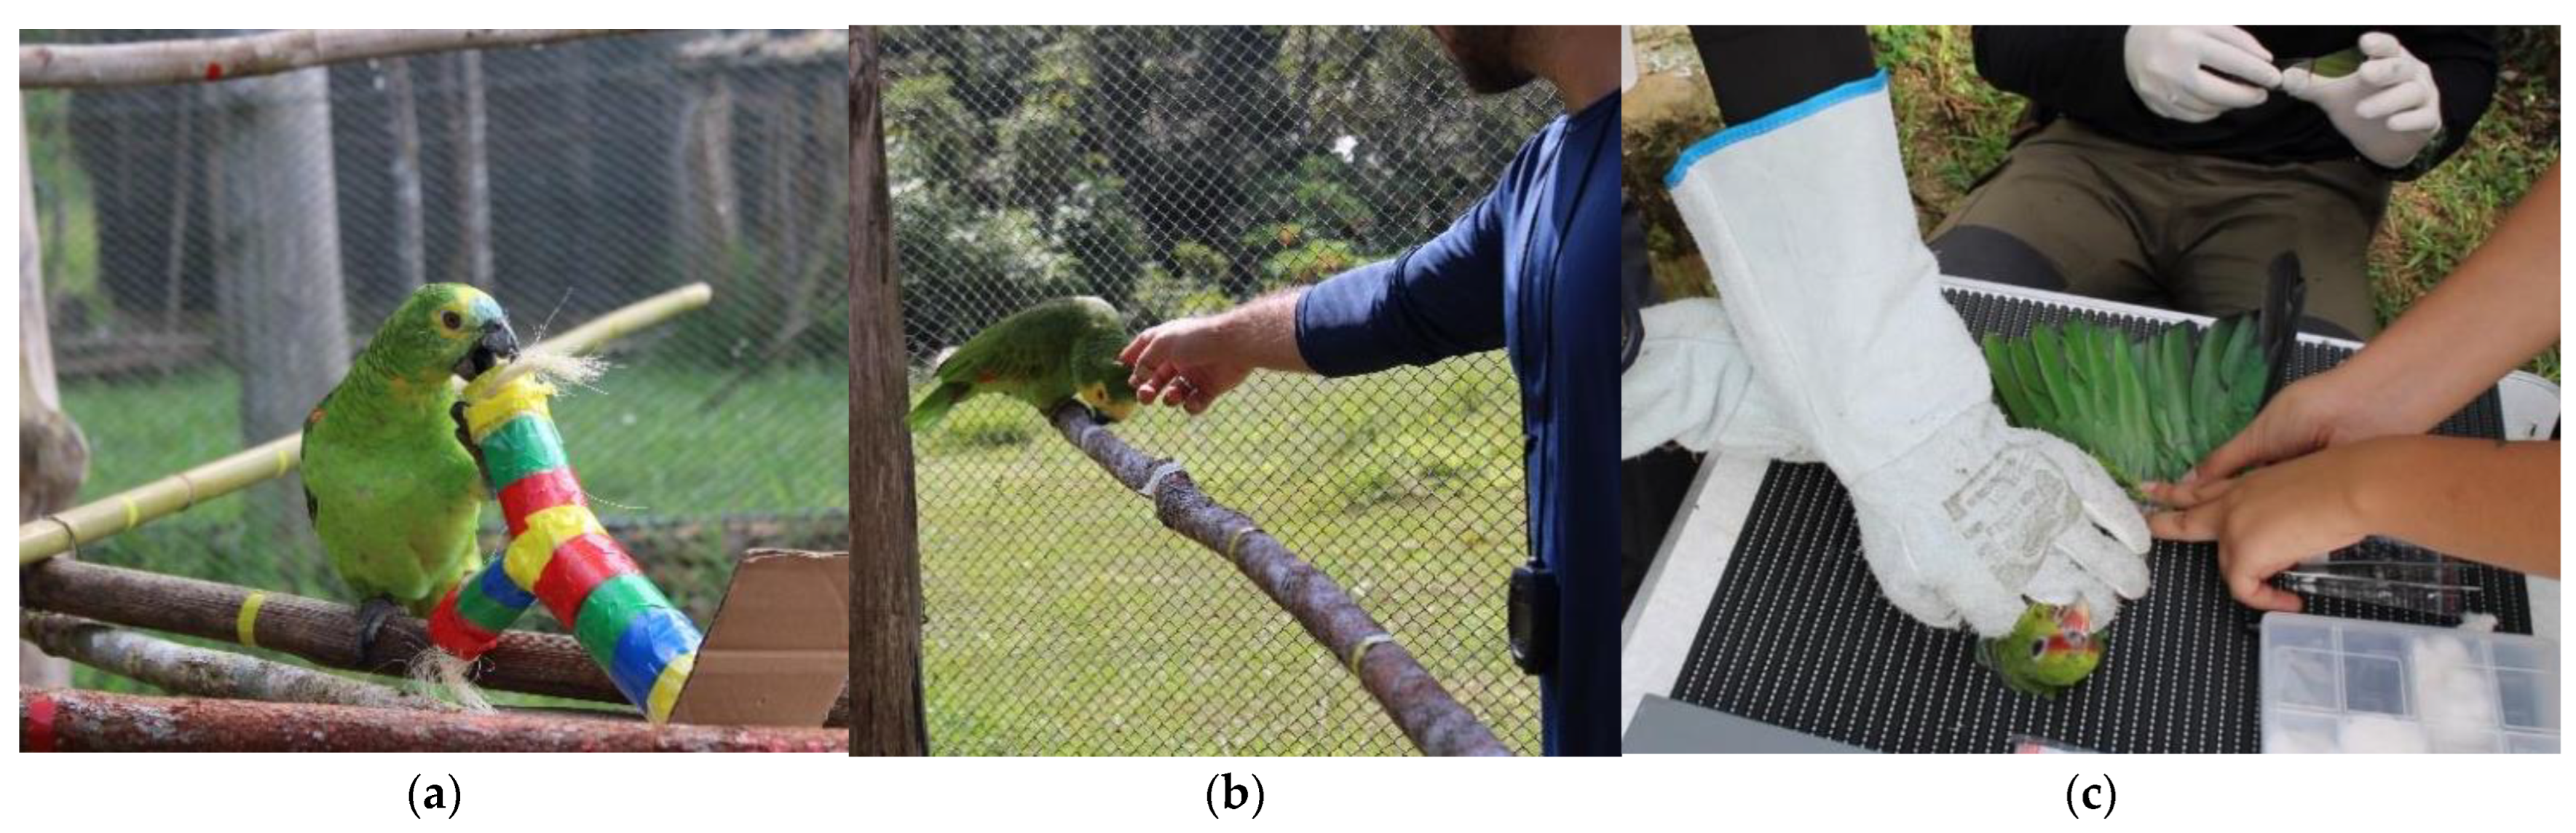 Animals | Free Full-Text | Individual Responses of Captive Amazon Parrots  to Routine Handling Can Reflect Their Temperament